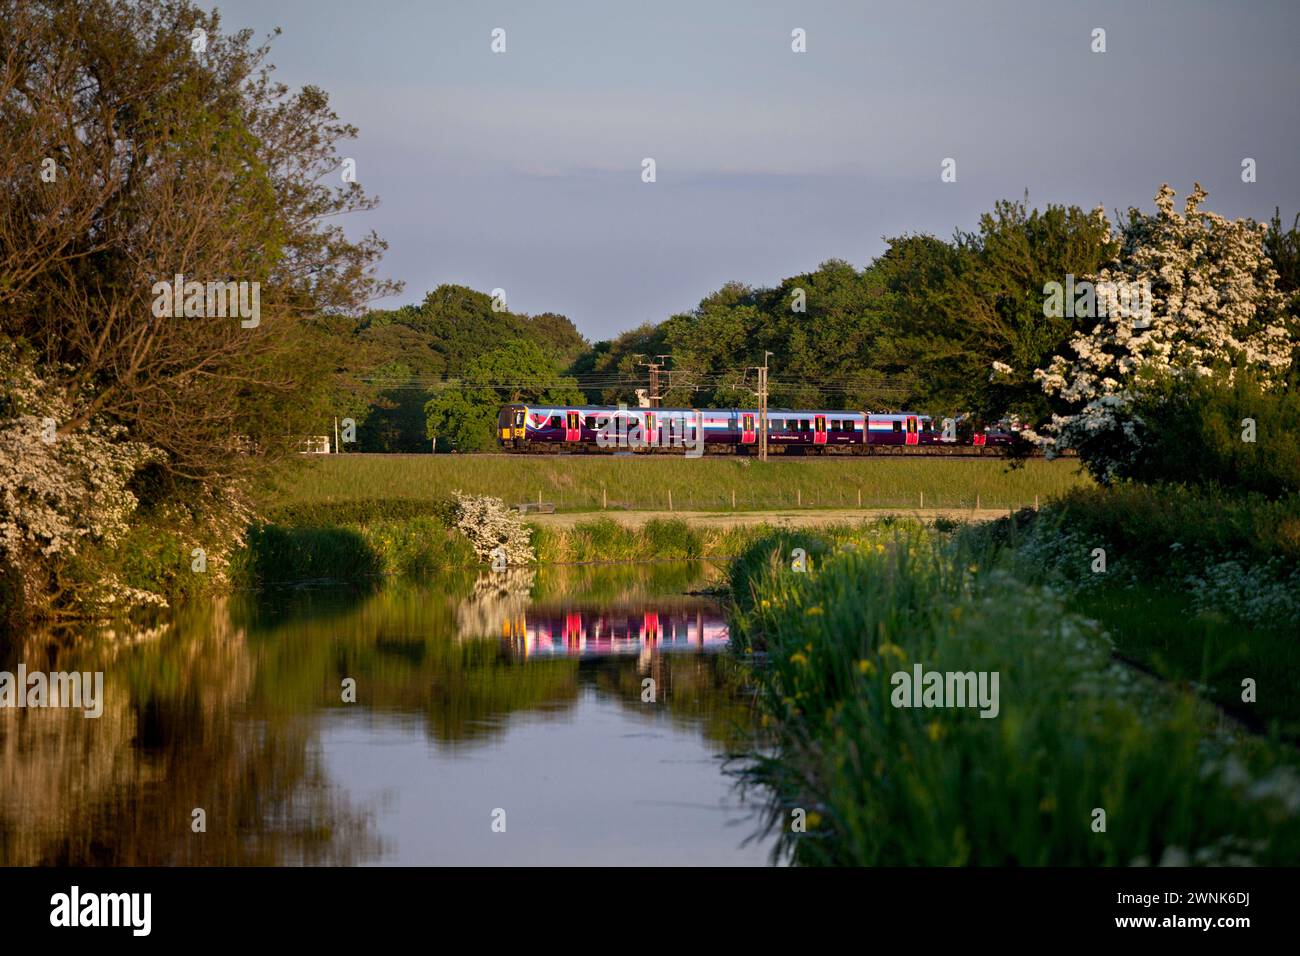 First Transpennine Express class 350 Desiro electri train on the electrified west coast mainline reflected in the canal at Catterall, Lancashire Stock Photo